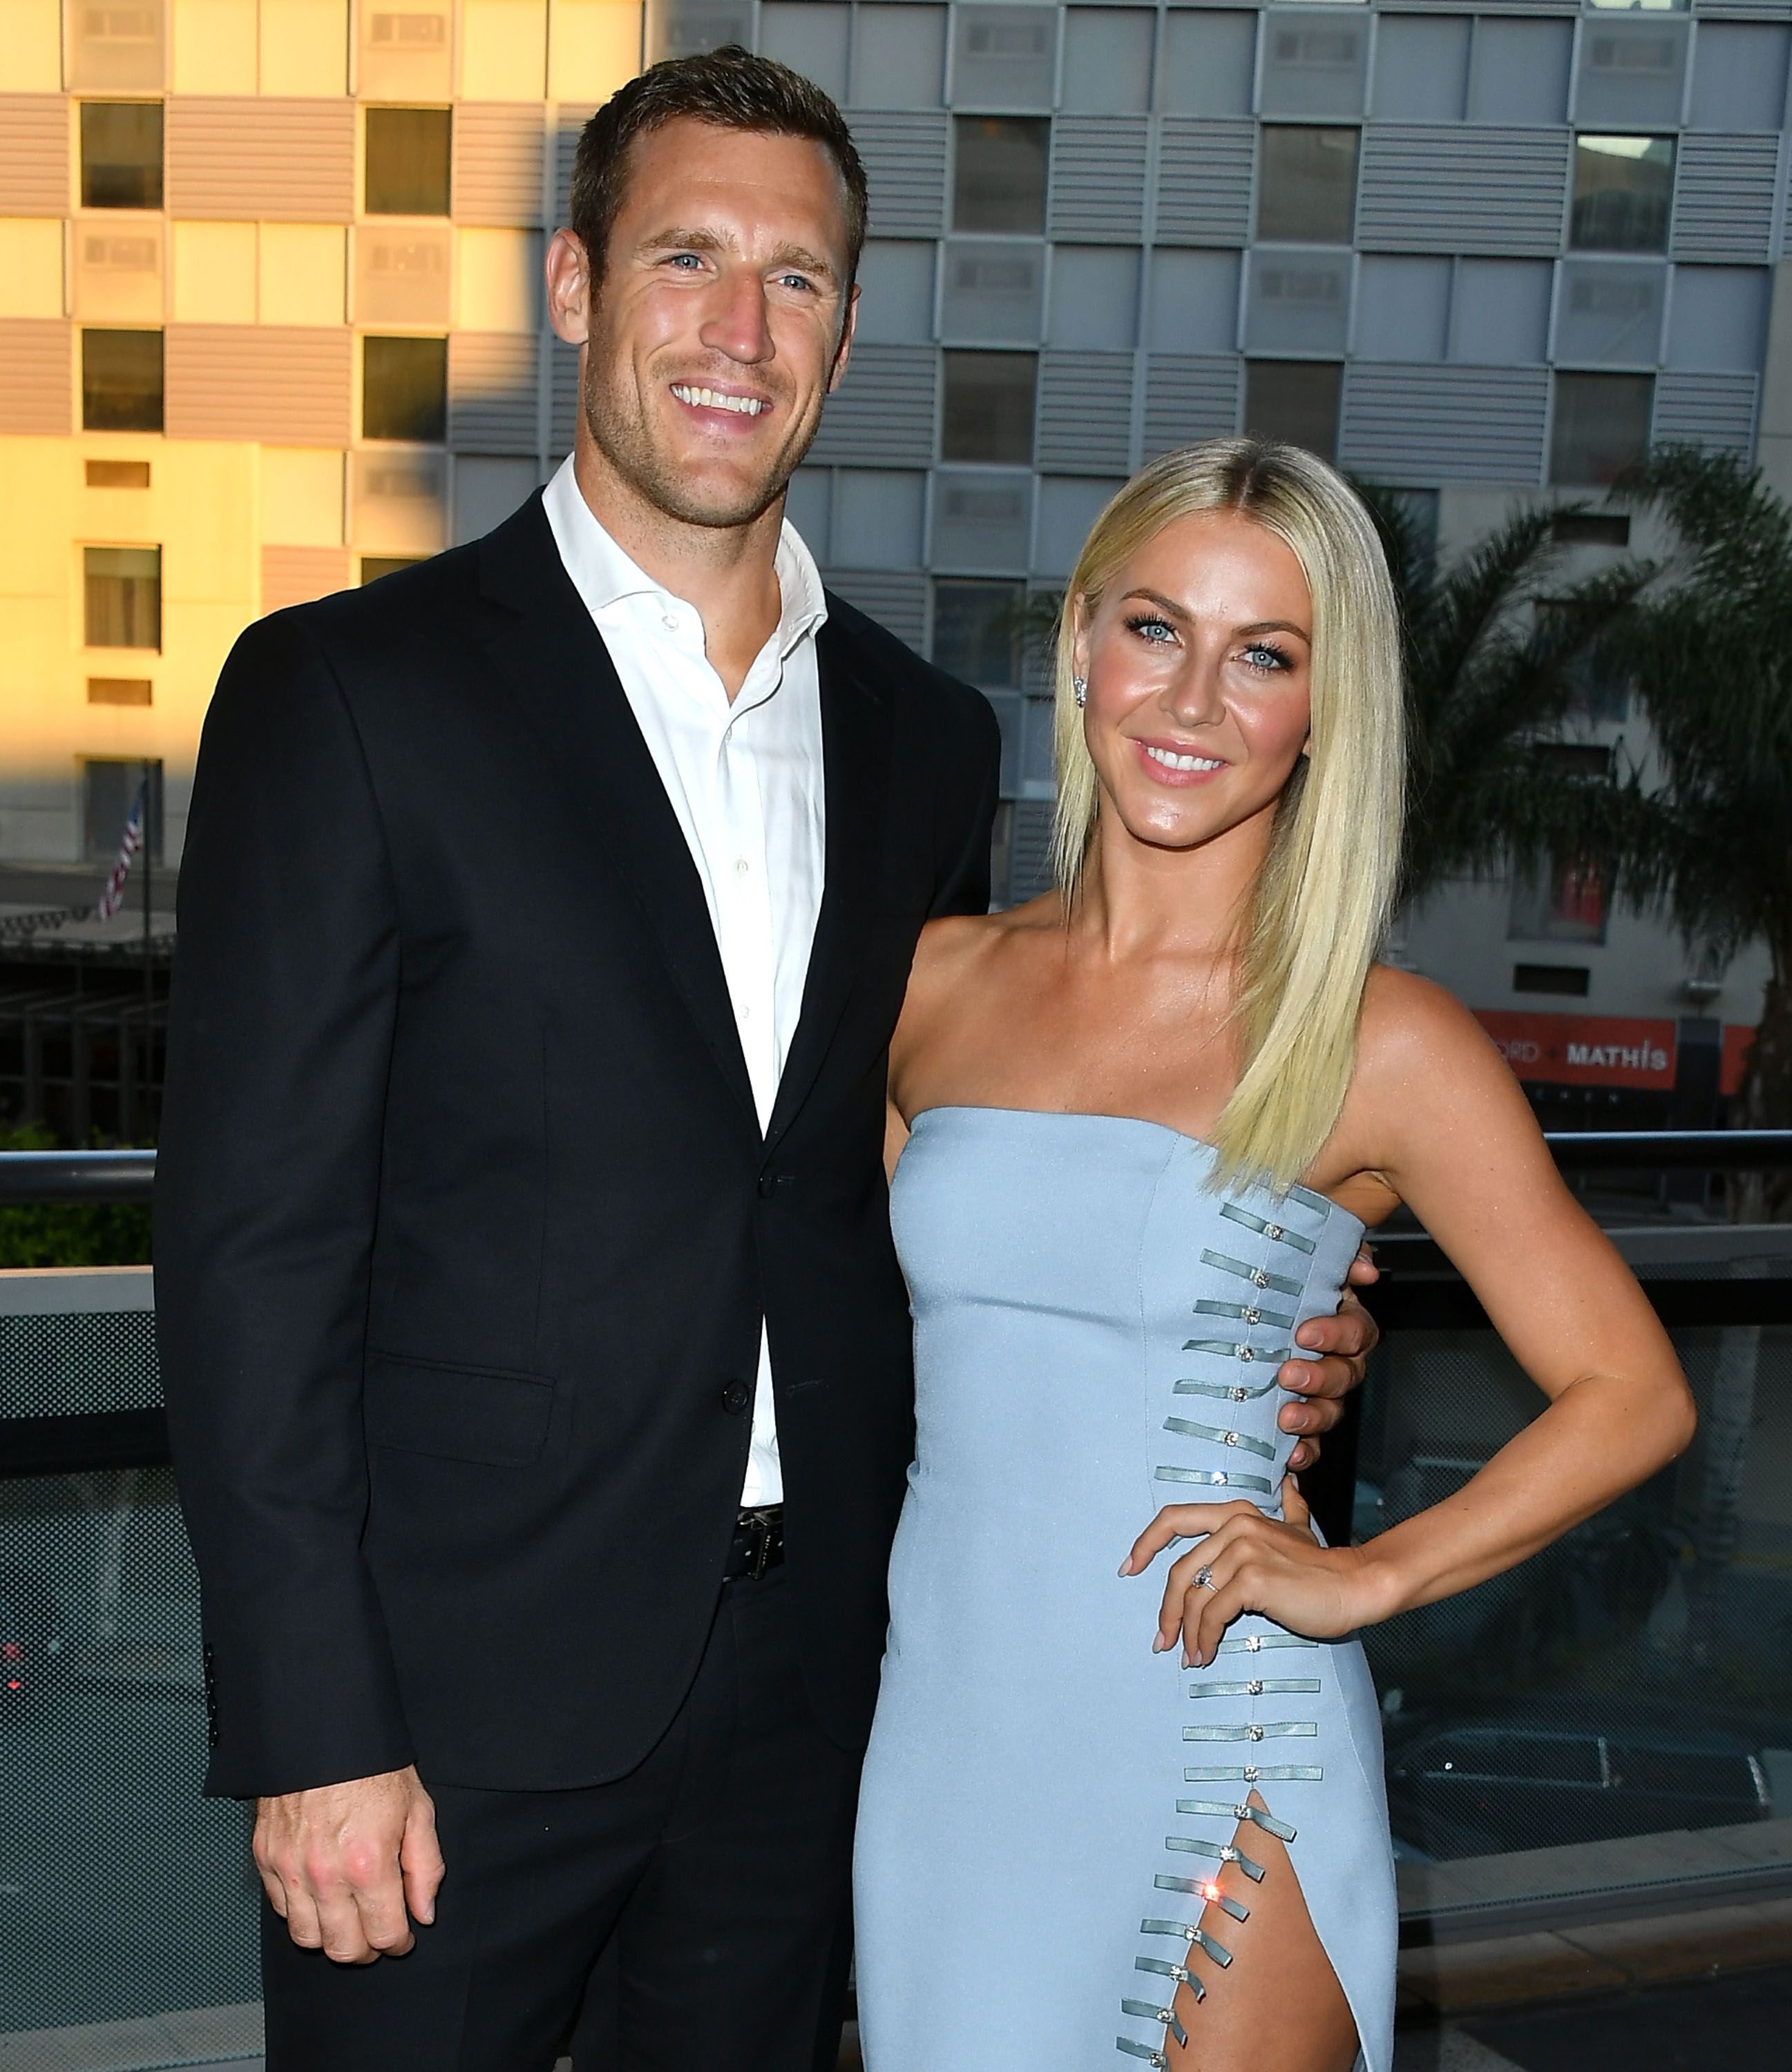 Julianne Hough and Brooks Laich s Love Story Will Make You Melt